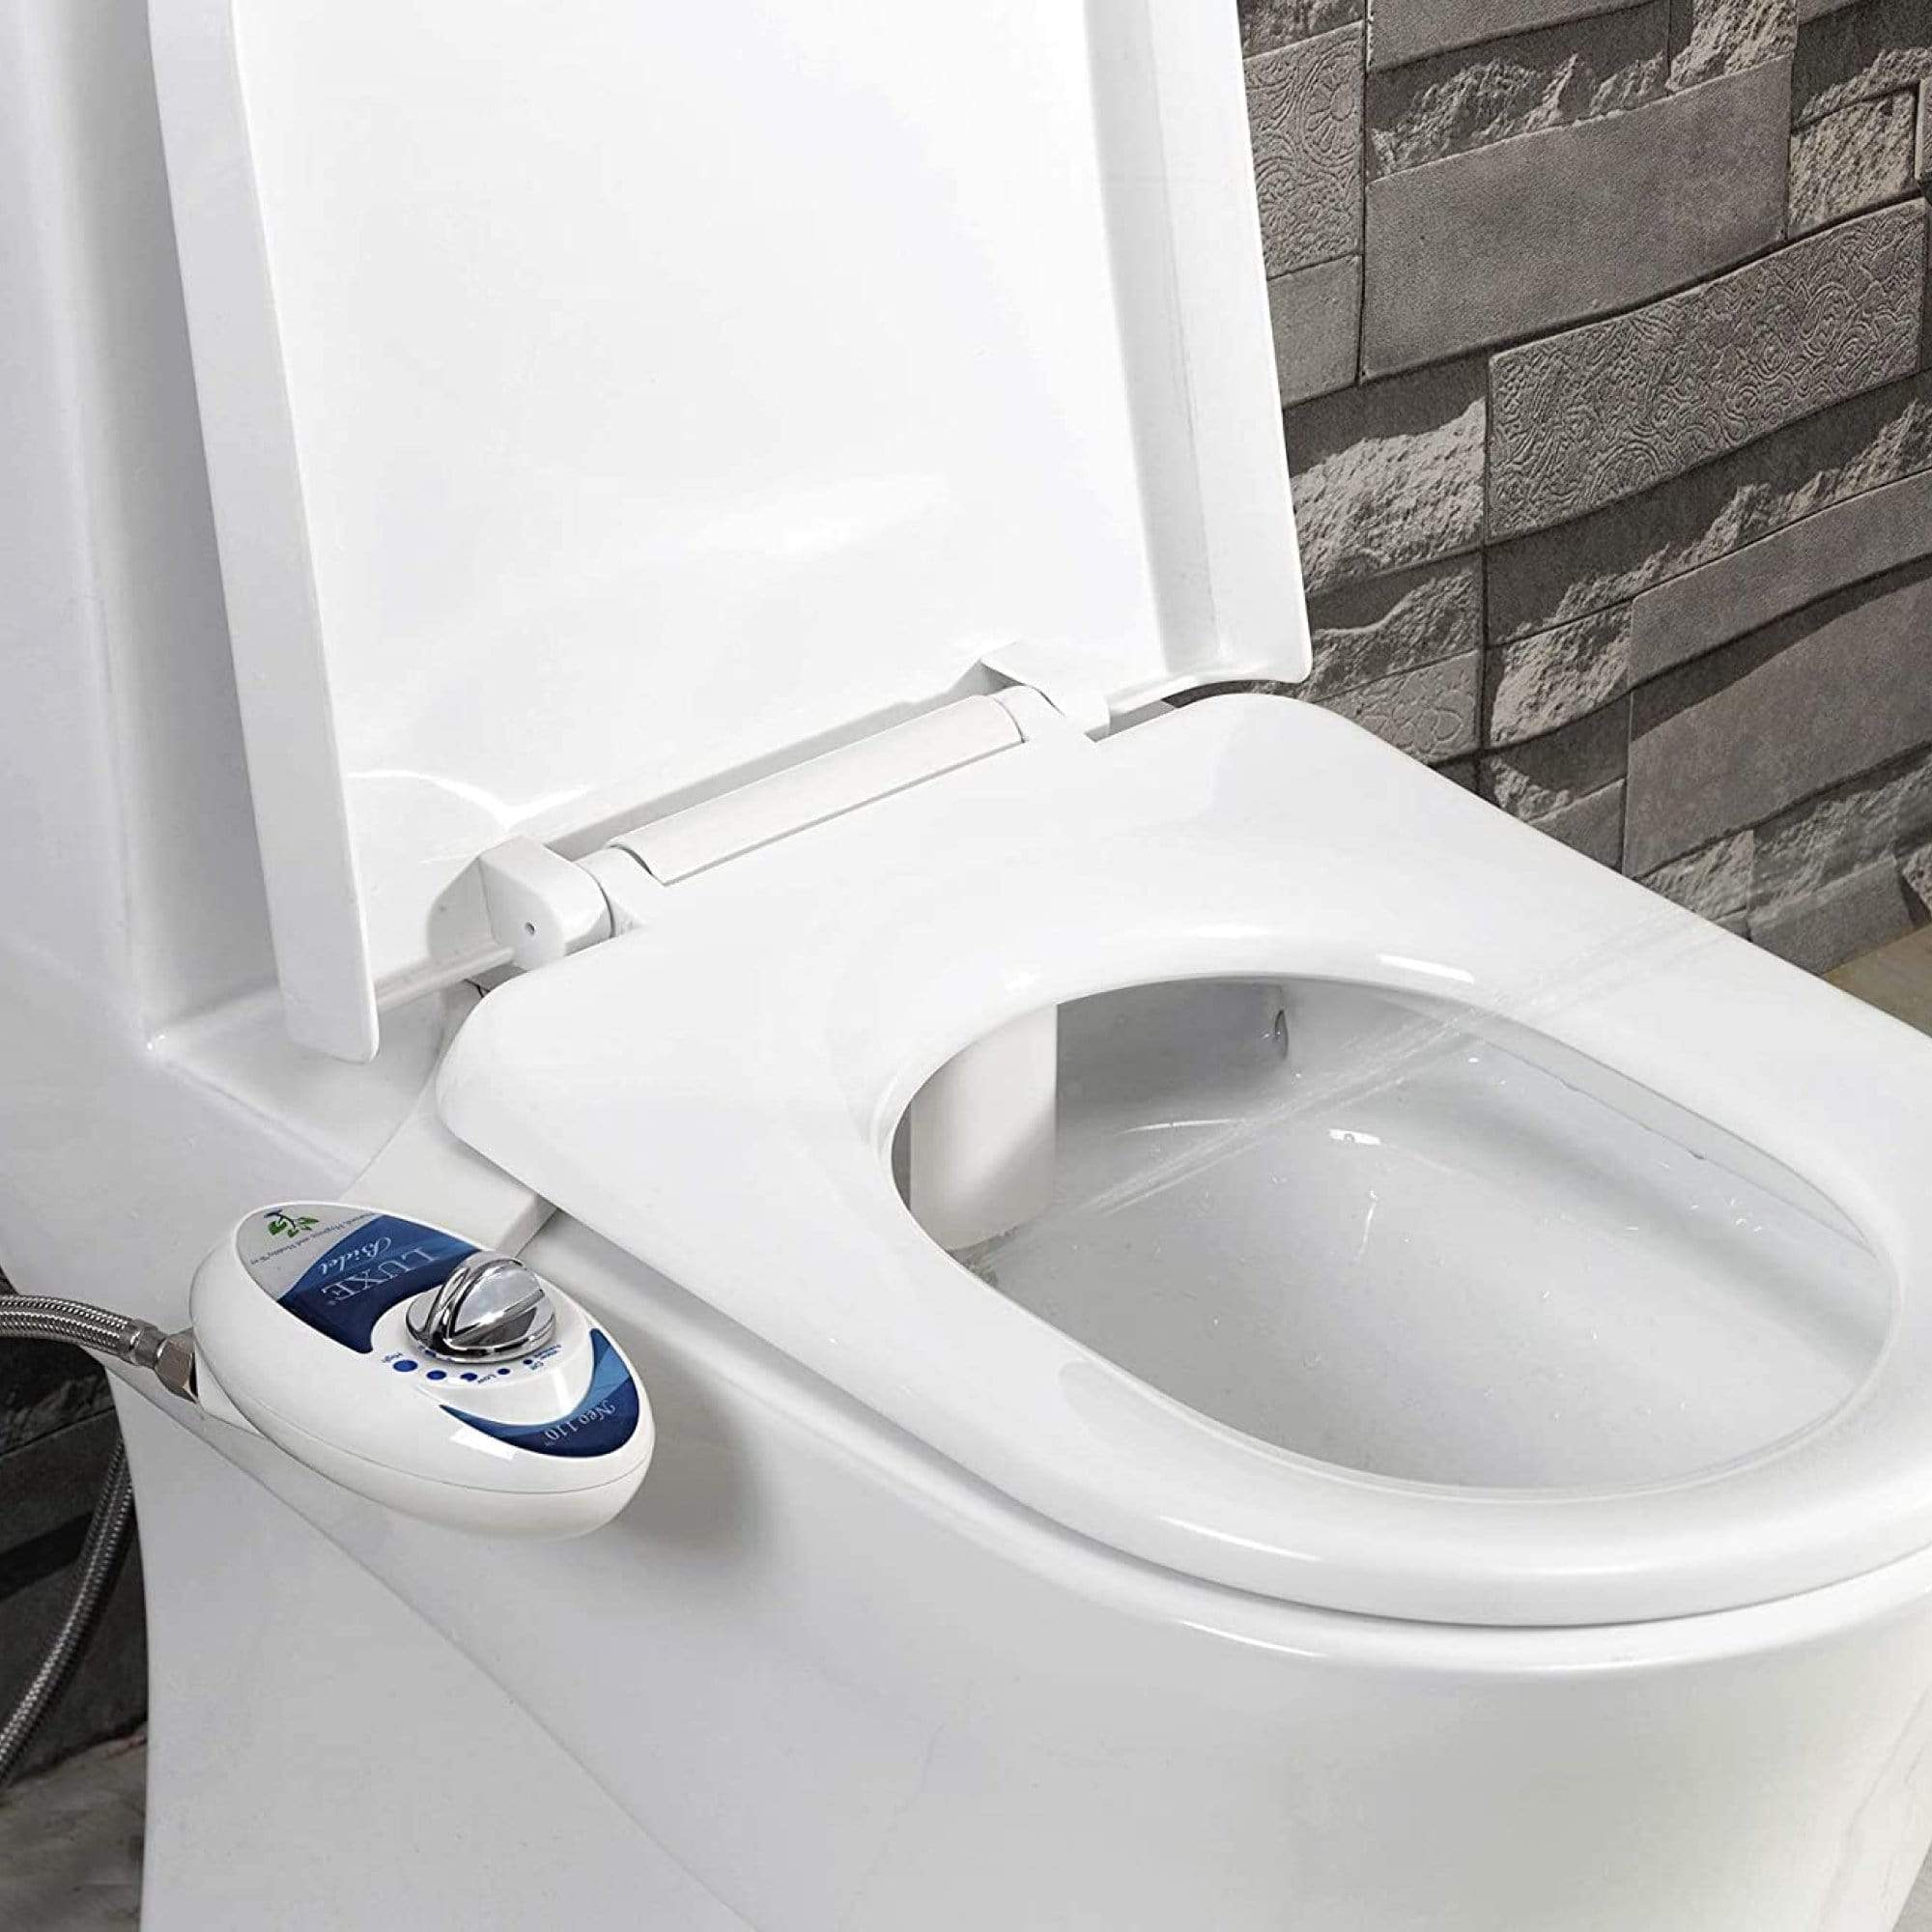 NEO 110 Blue installed on a toilet with water spraying from nozzles